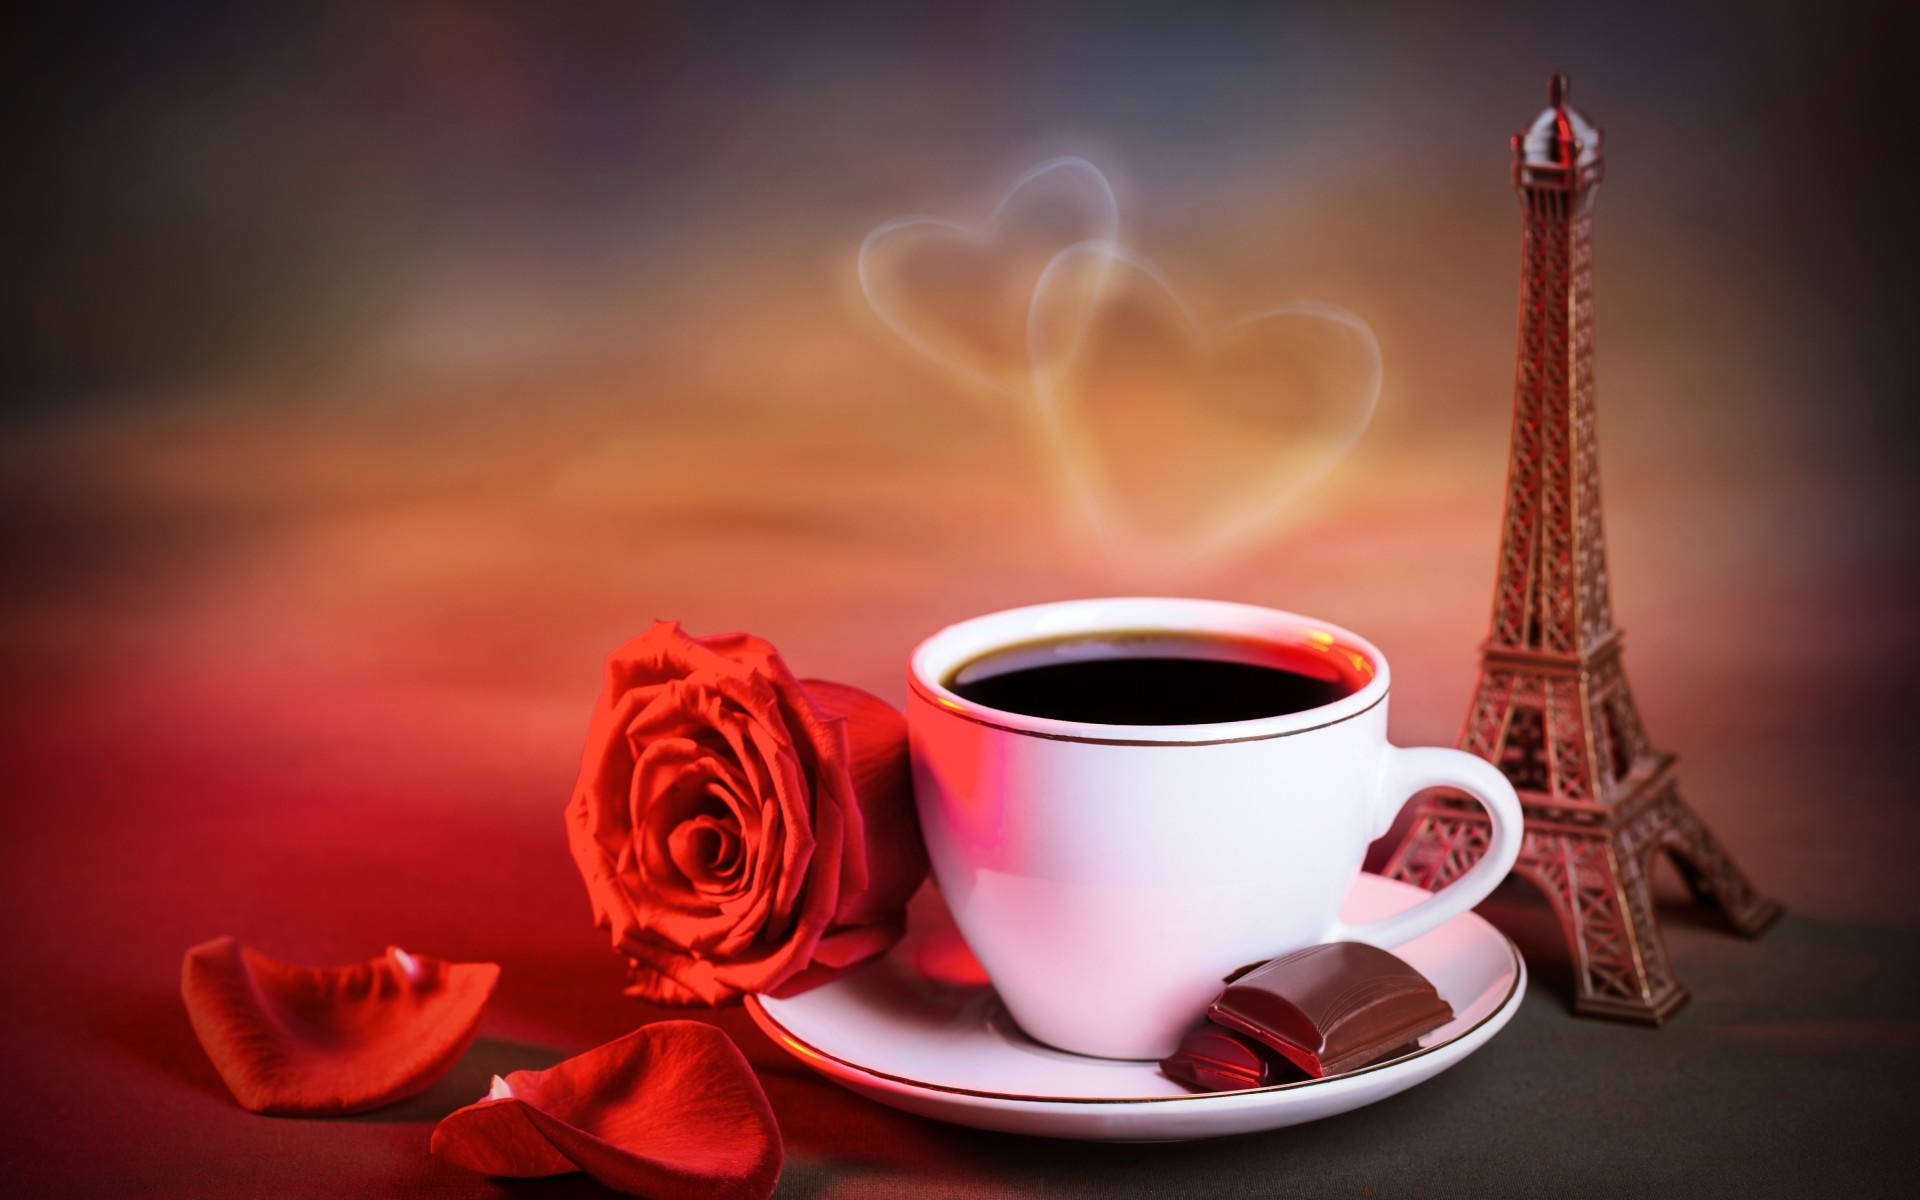 Wake up and smell the coffee, with a beautiful red rose! Wallpaper